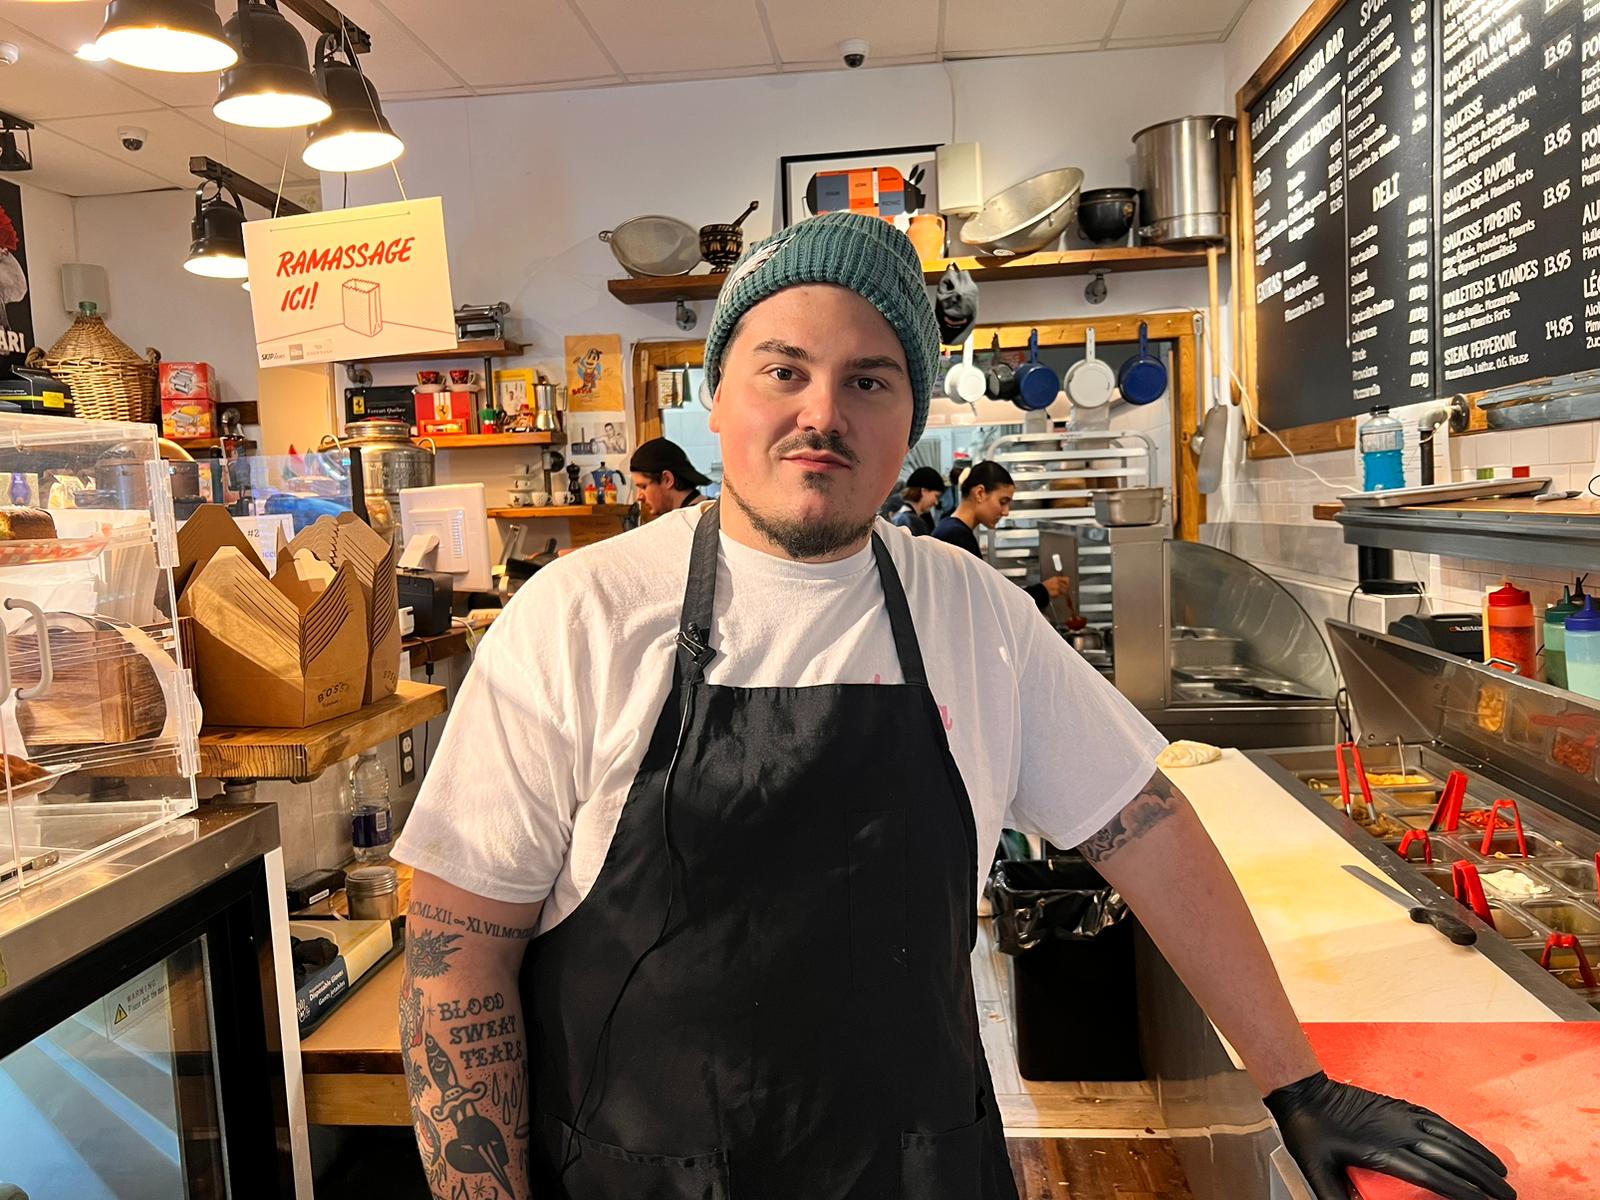 Montreal Italian sandwich shop boom fuelled by family, tradition